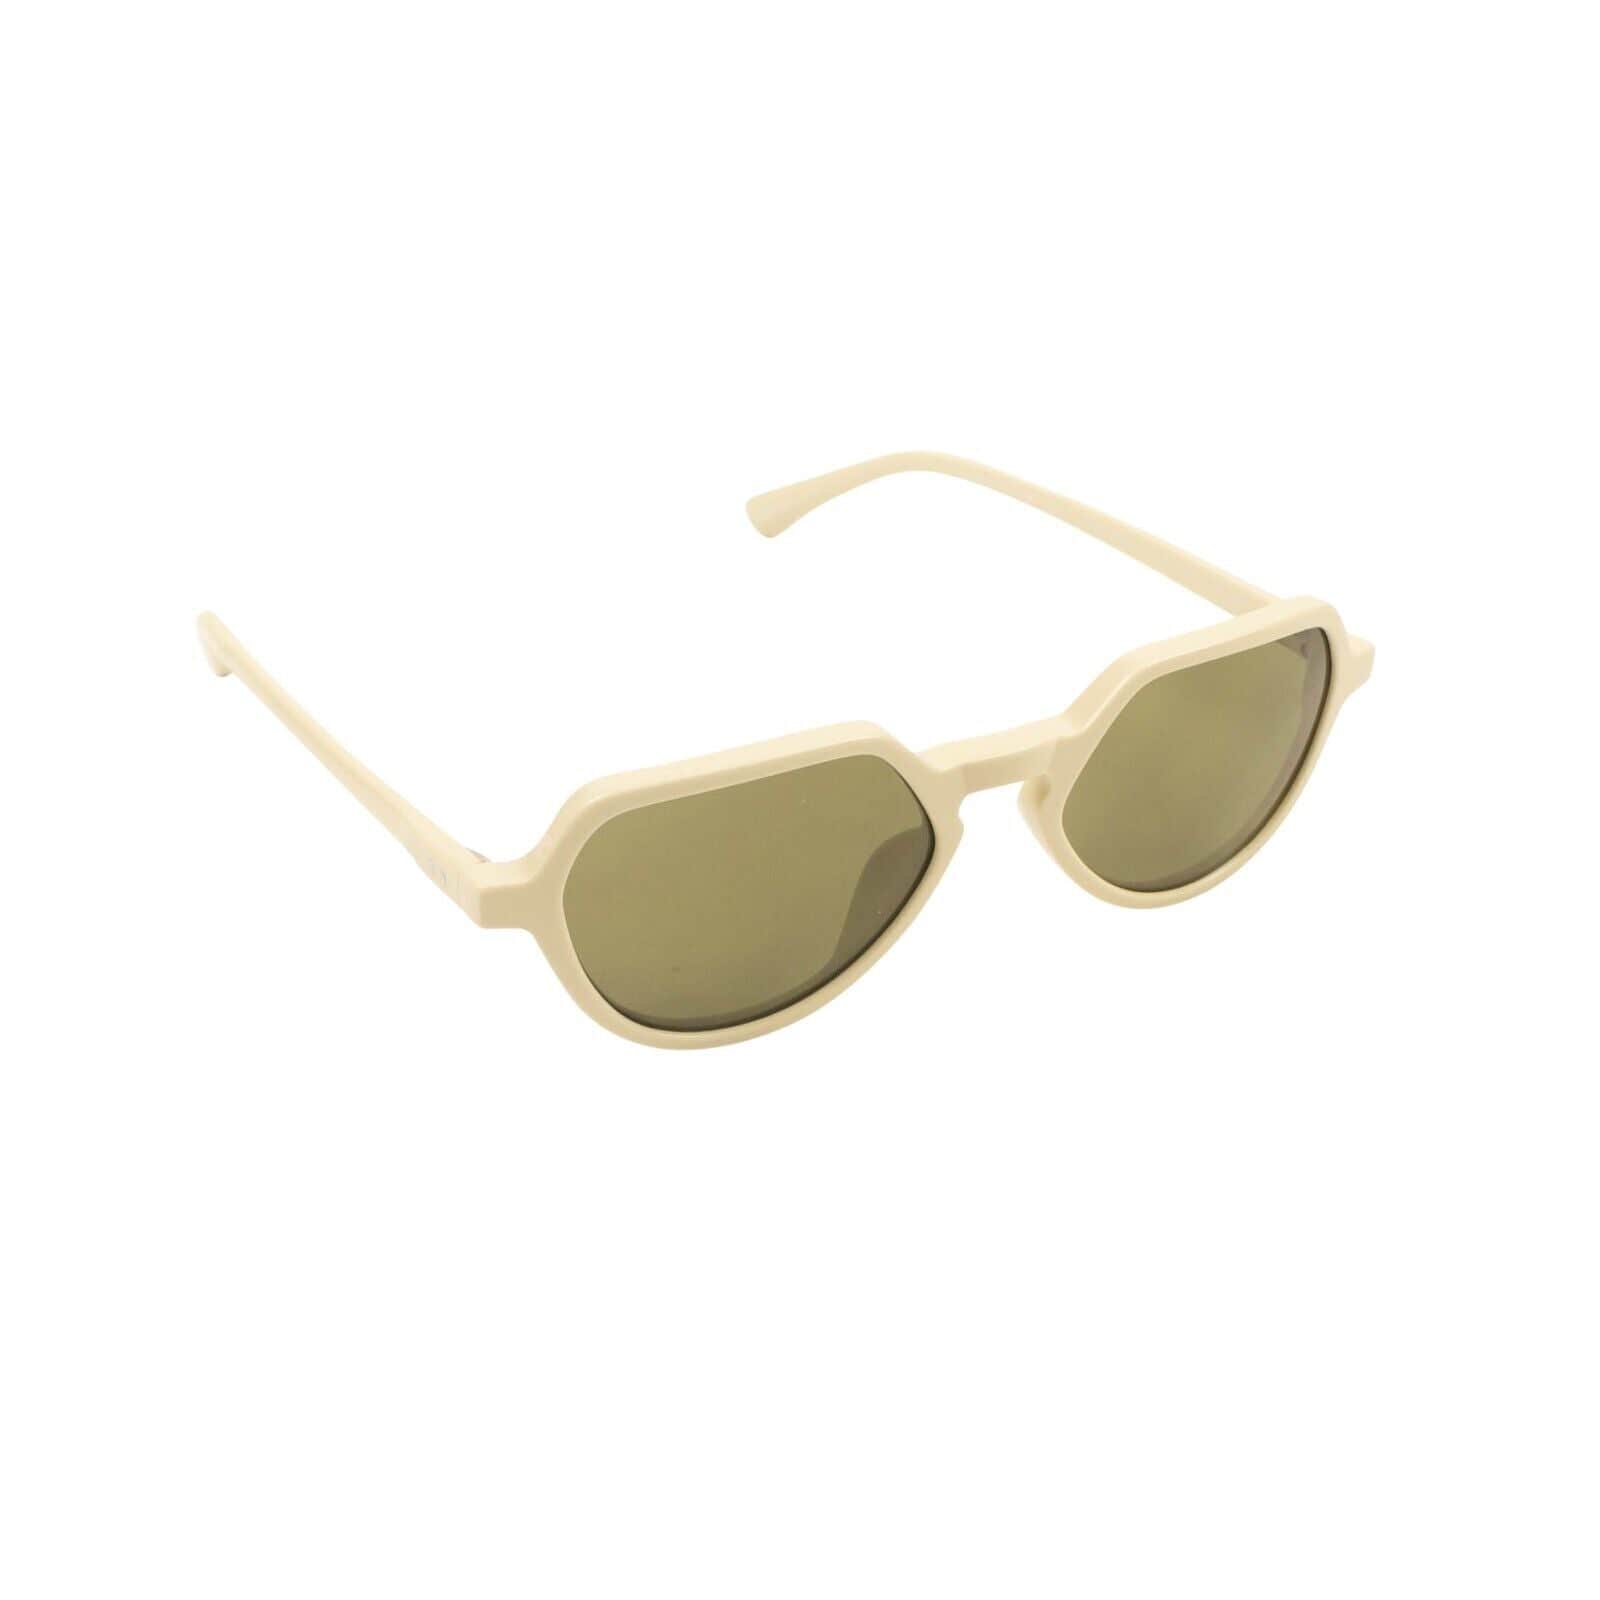 Dries Van Noten x Linda Farrow Vinatge channelenable-all, chicmi, couponcollection, dries-van-noten-x-linda-farrow-vinatge, gender-mens, gender-womens, main-accessories, mens-shoes, size-os, under-250, unisex-eyewear OS Ivory Sunglasses 95-DLF-3002/OS 95-DLF-3002/OS